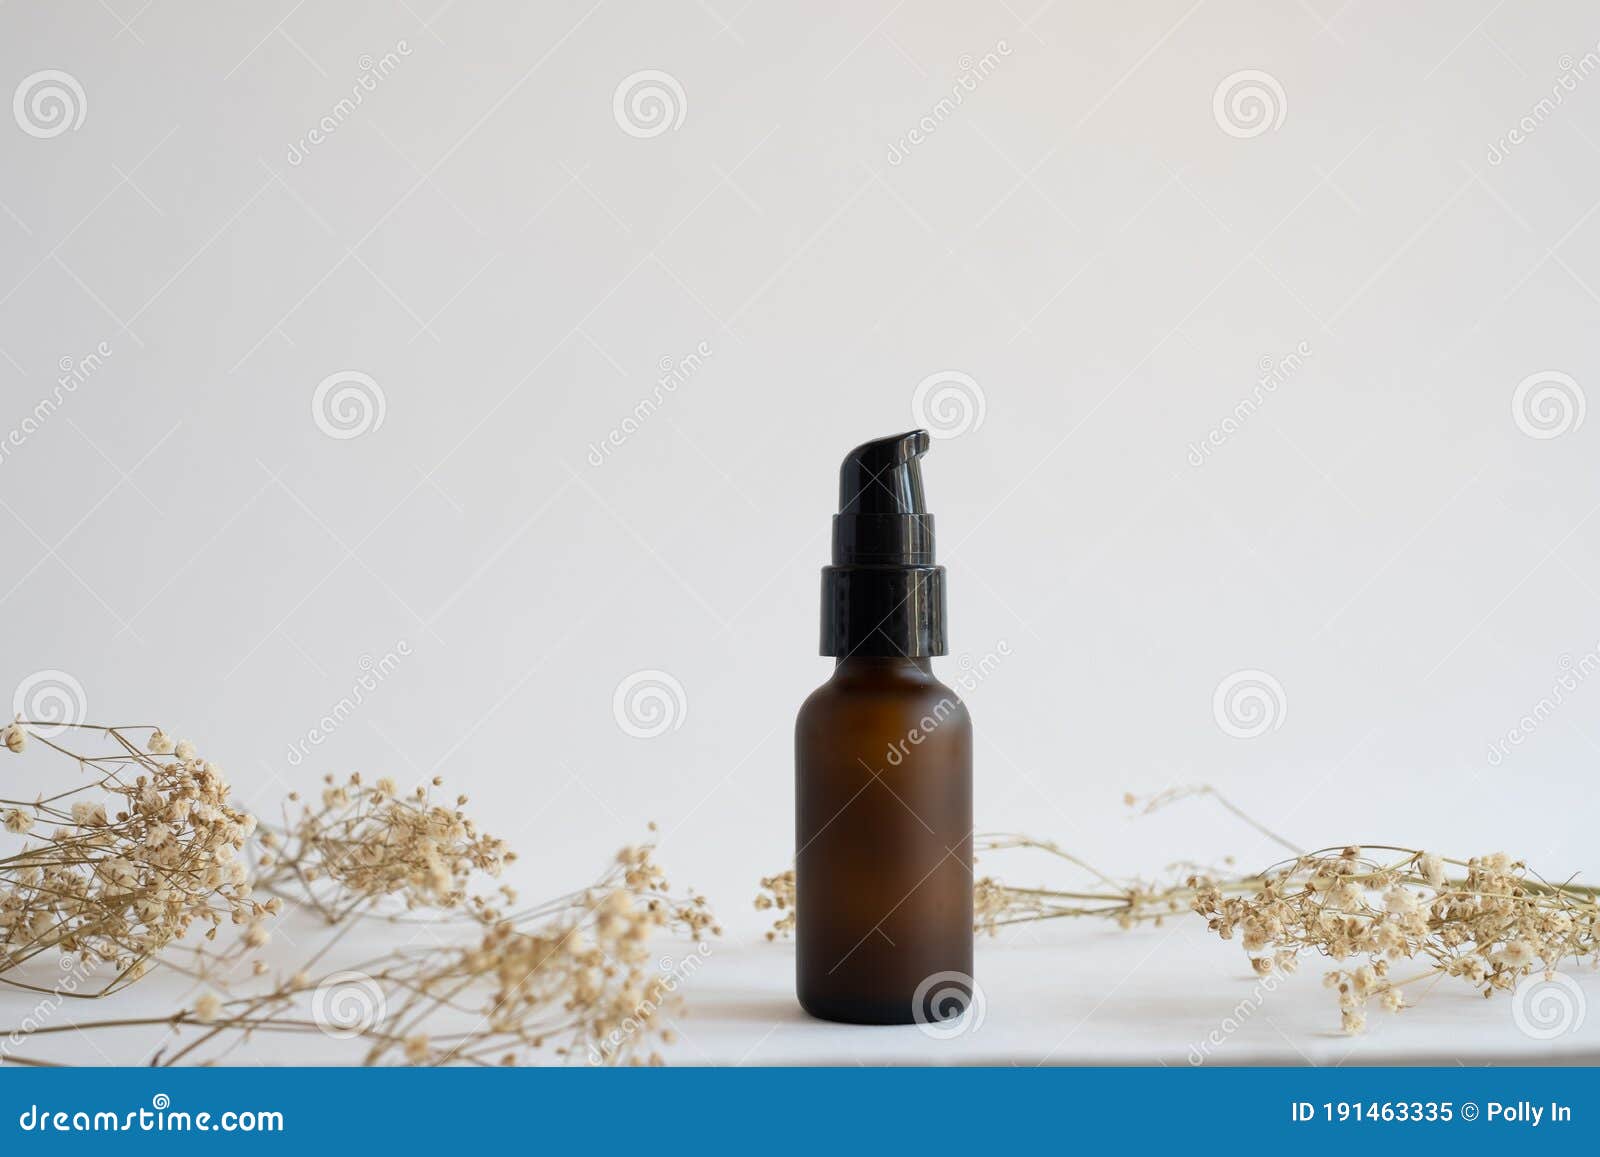 Download 3 272 Bottle Dropper Mockup Photos Free Royalty Free Stock Photos From Dreamstime